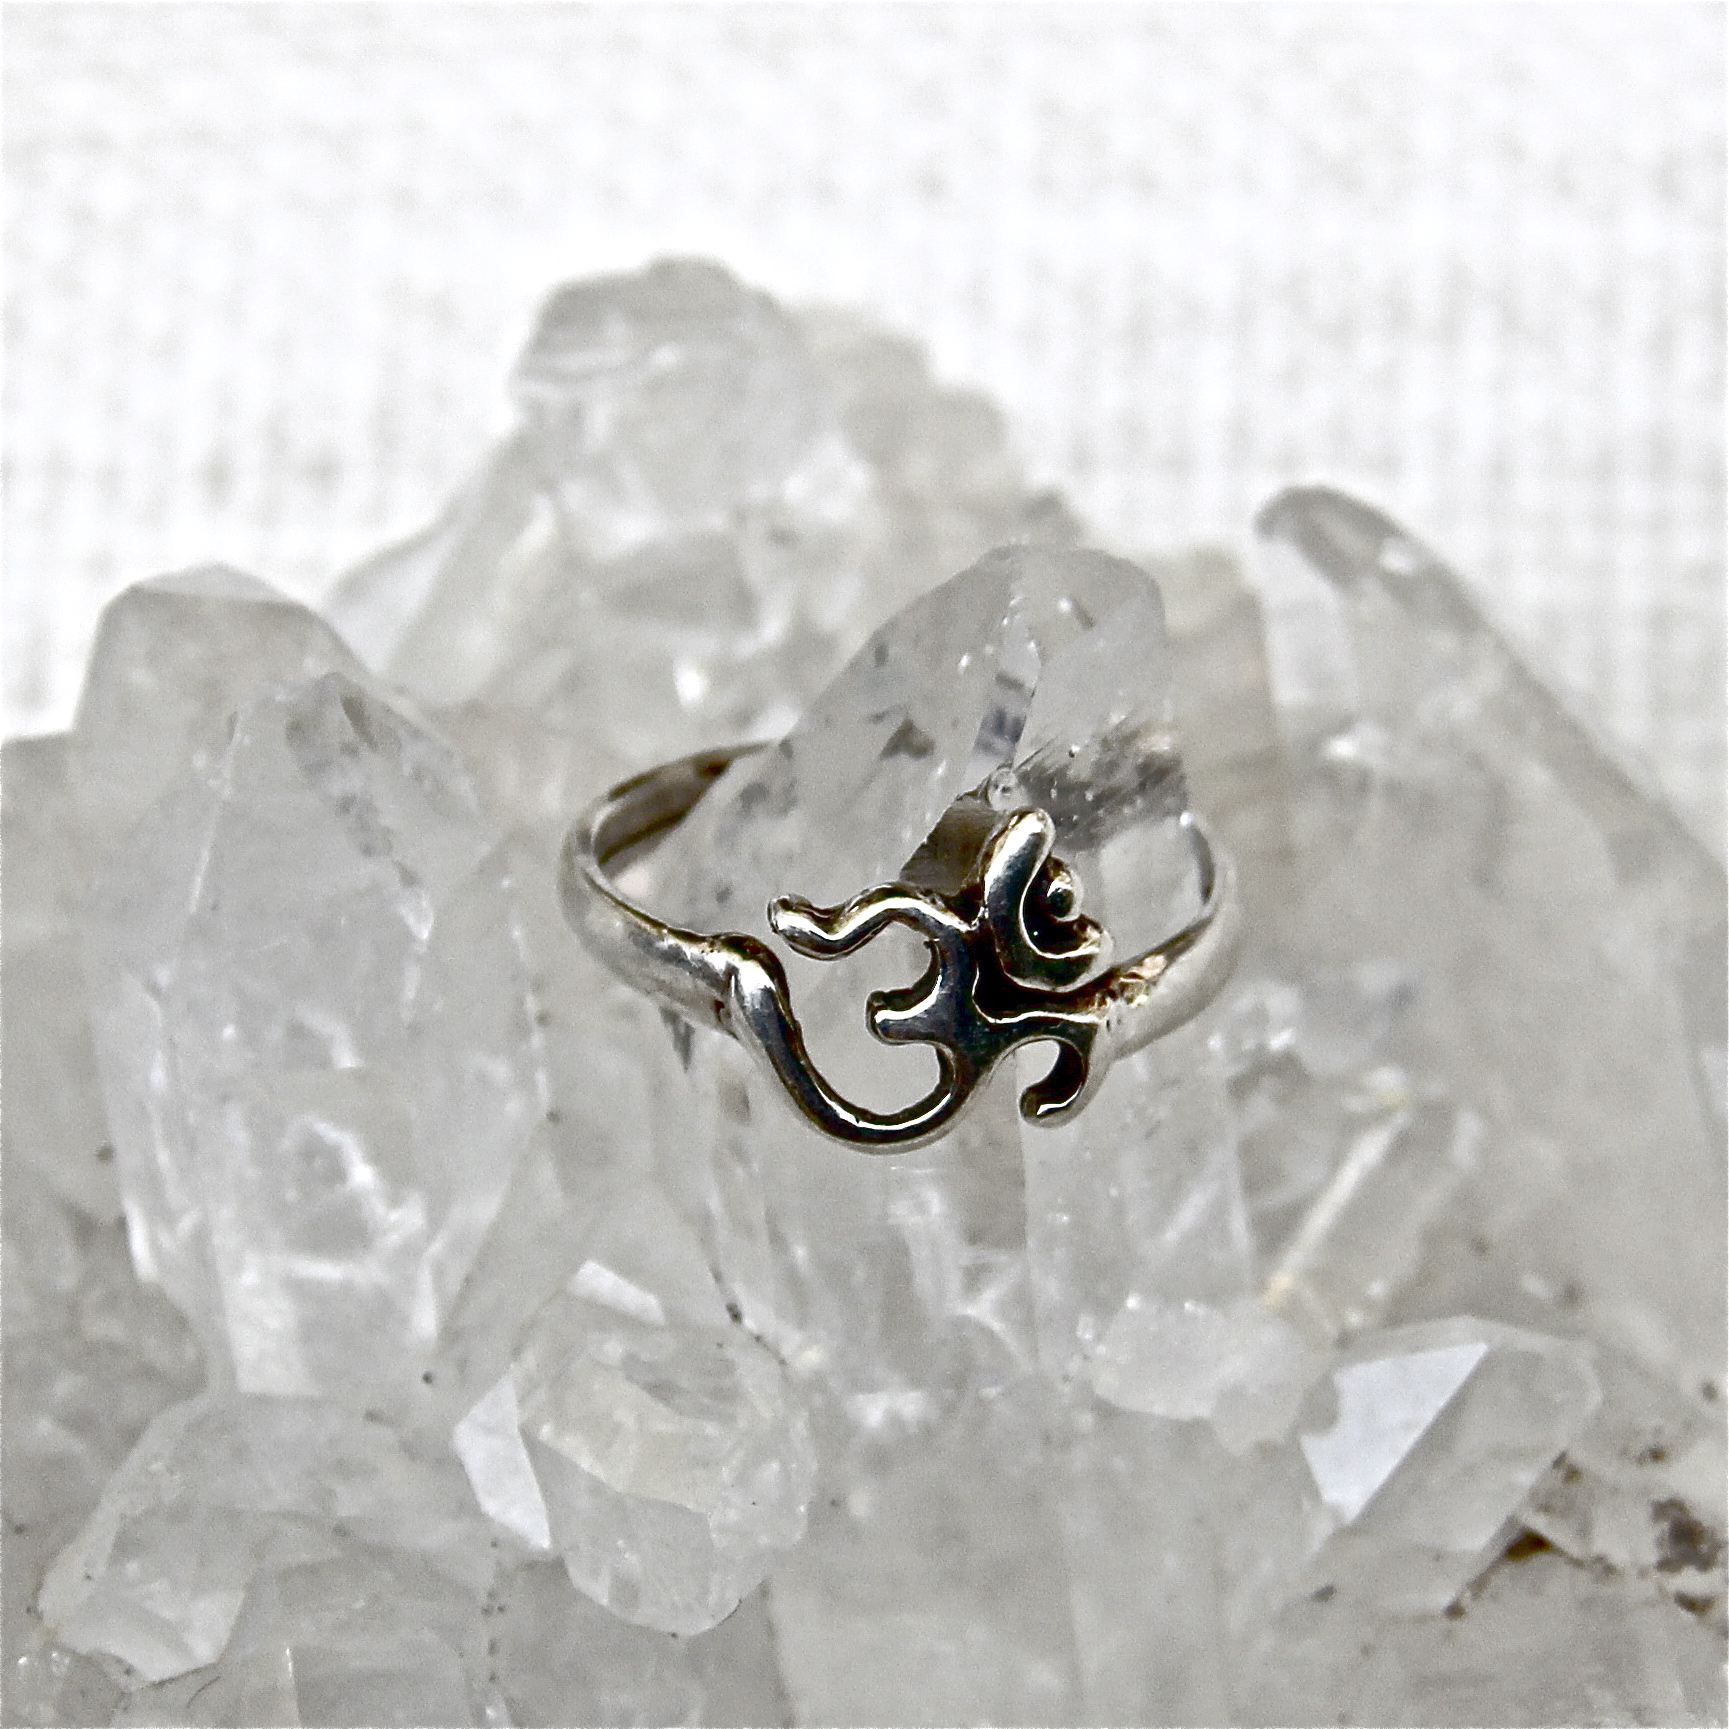 Ohm/Om Ring In Sterling Silver